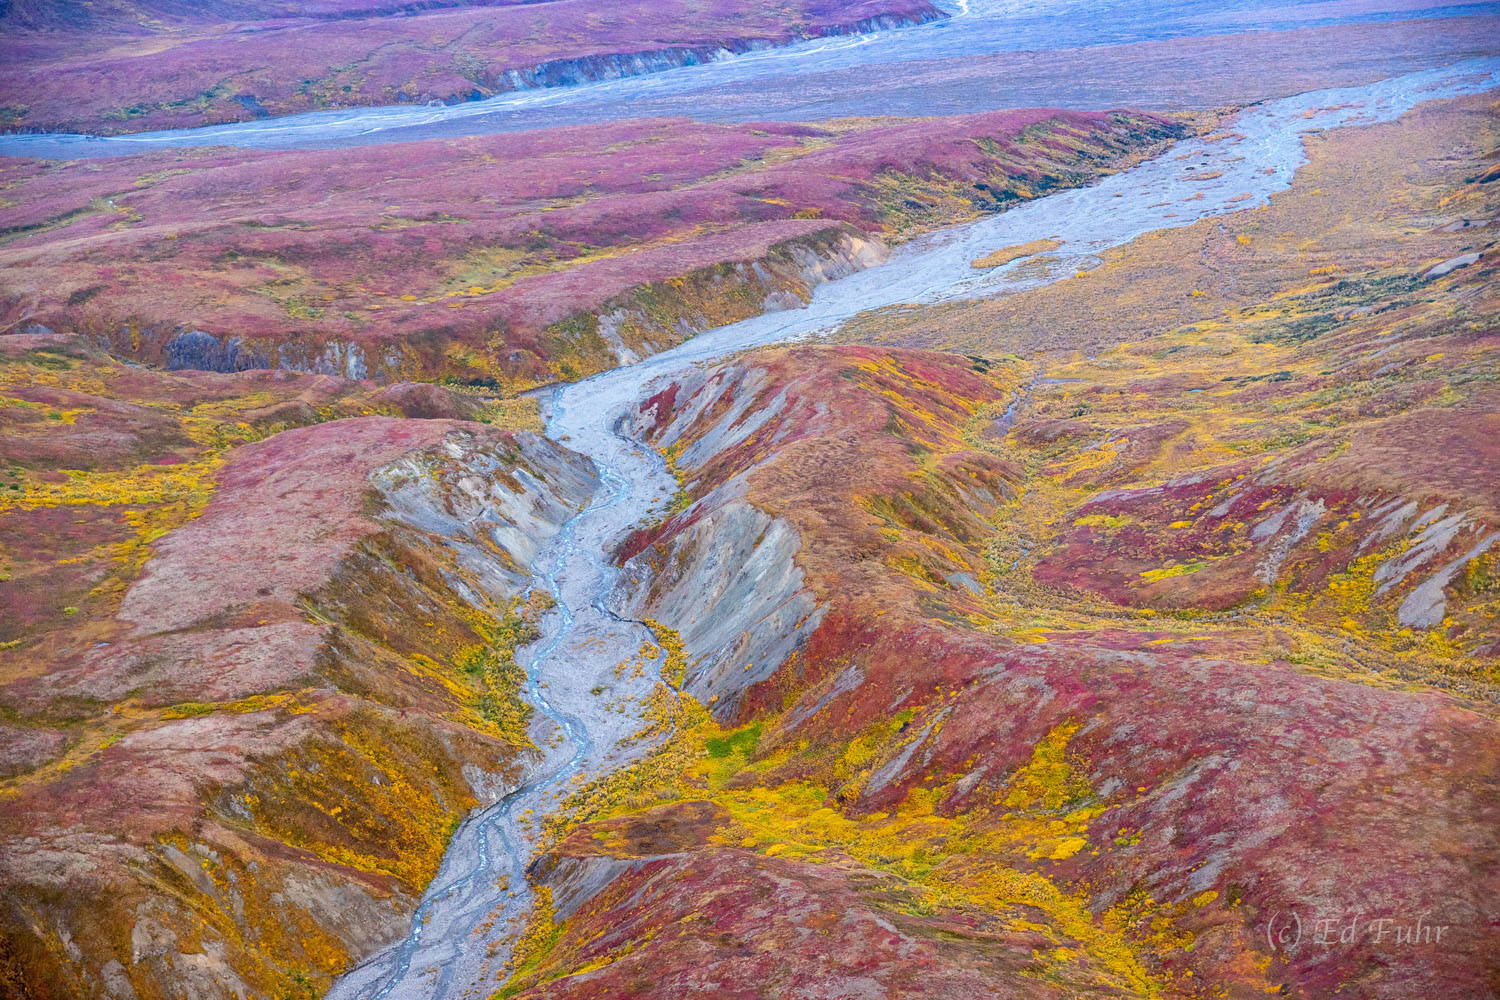 In autumn the Denali valley floor turns a colorful bouquet of colors and hues.